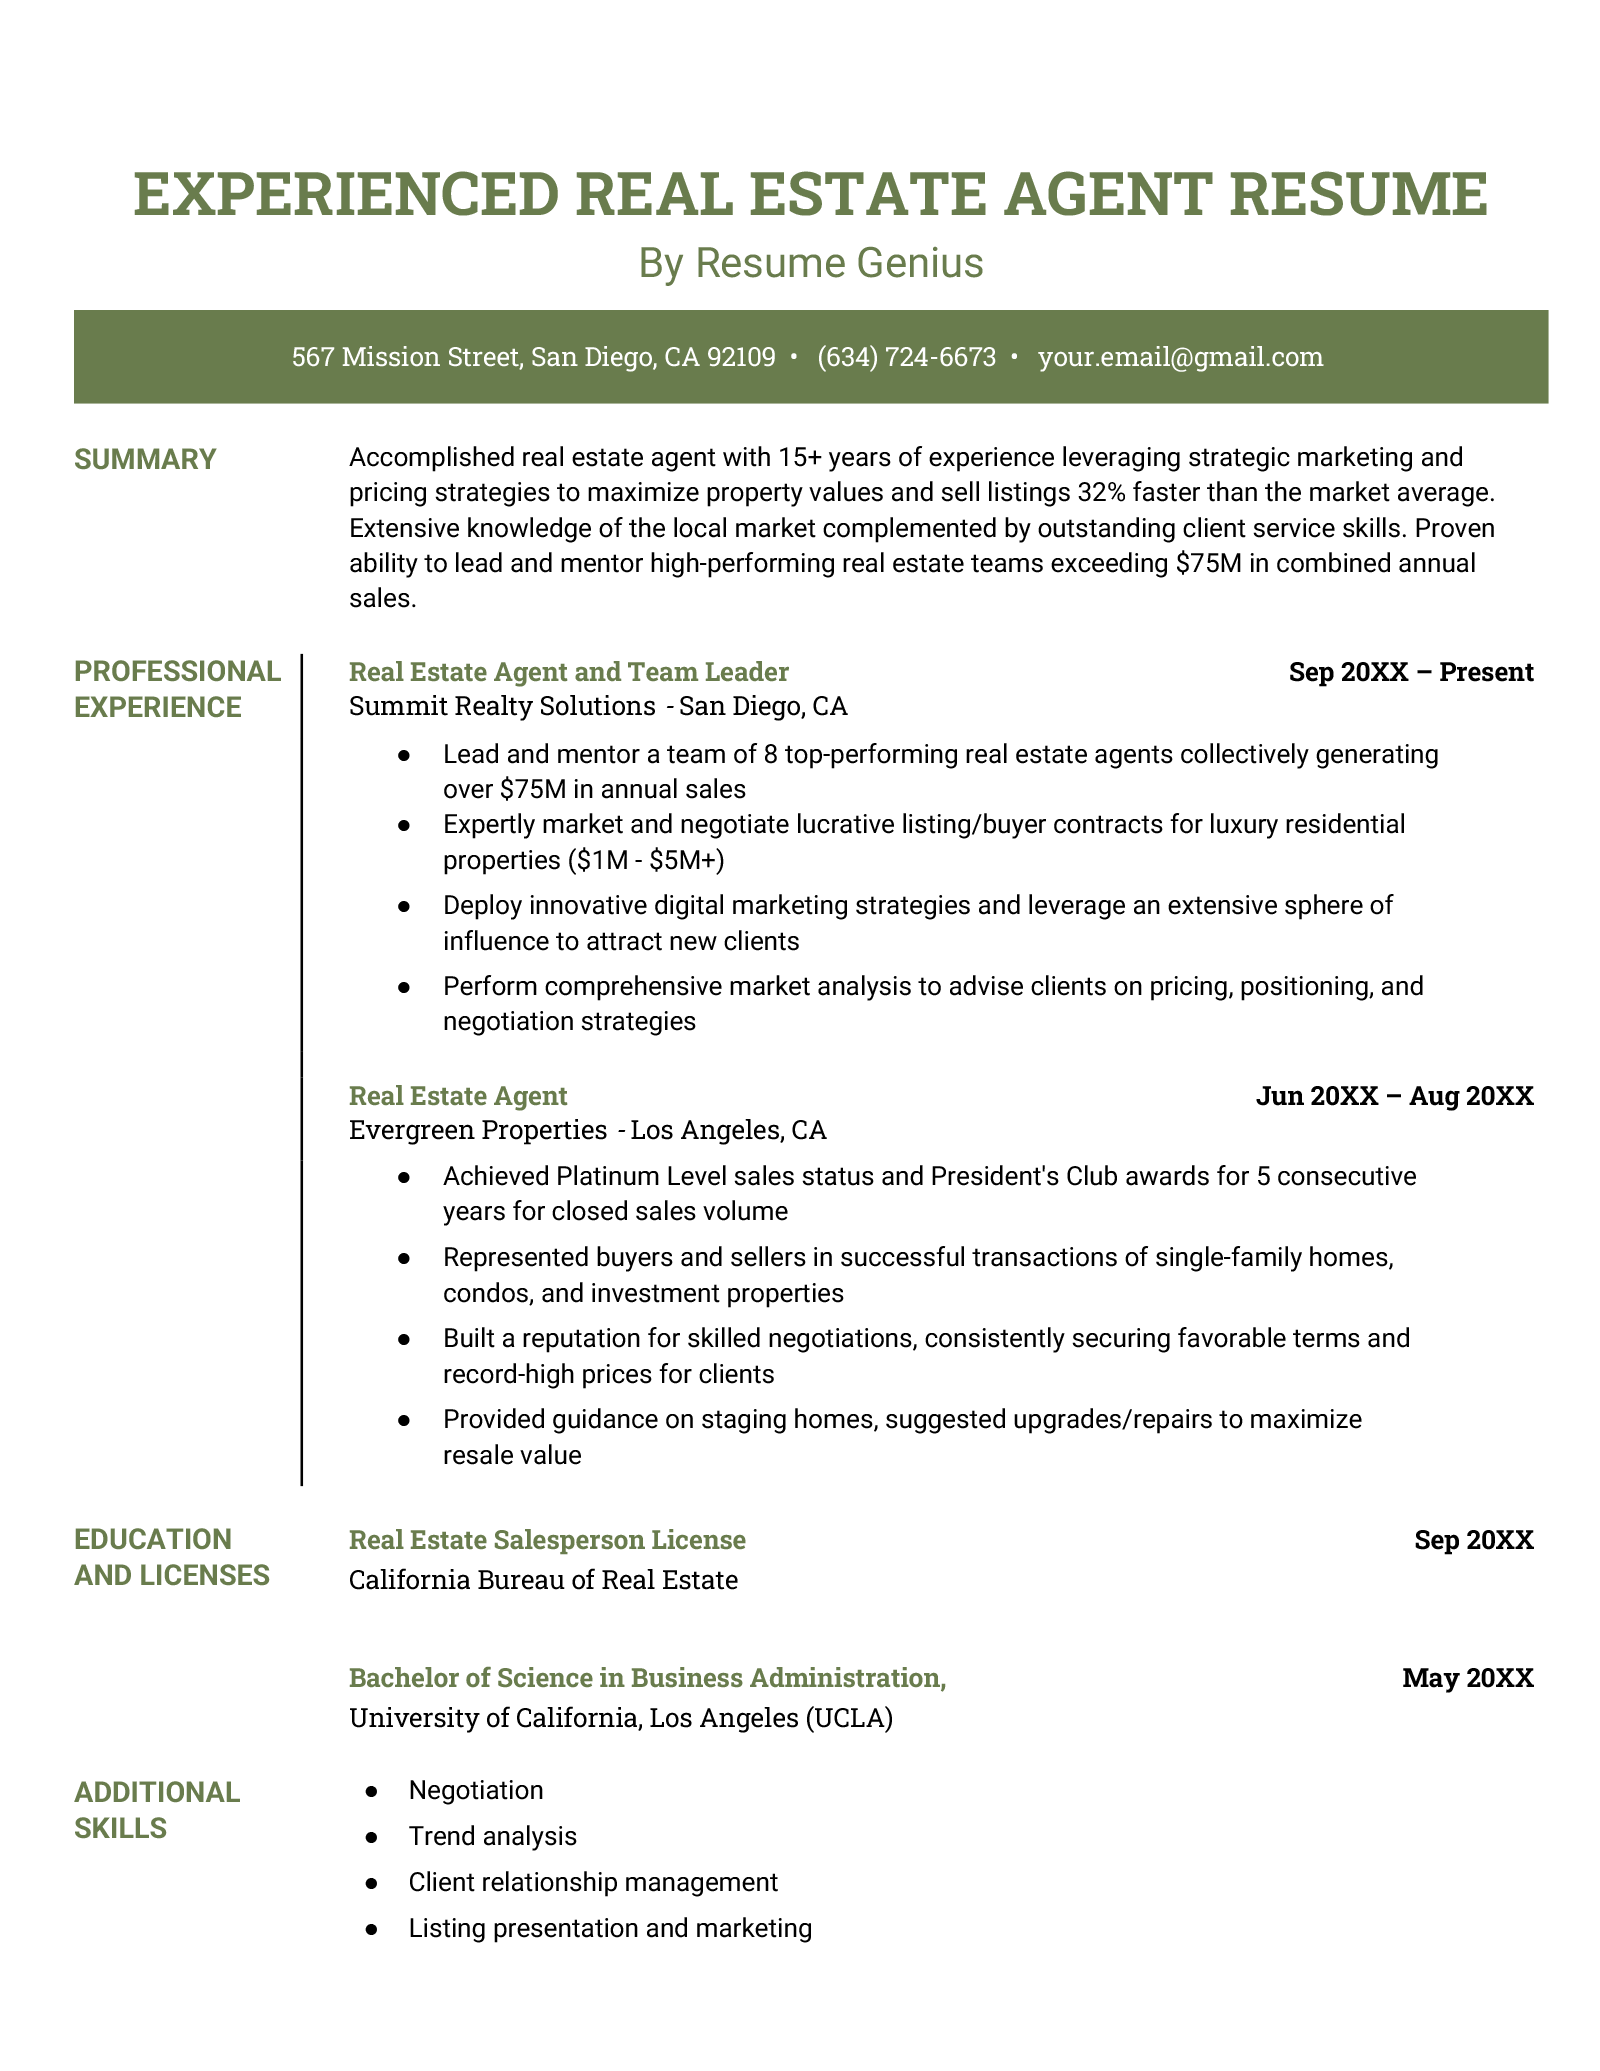 An example of an experienced real estate agent resume.